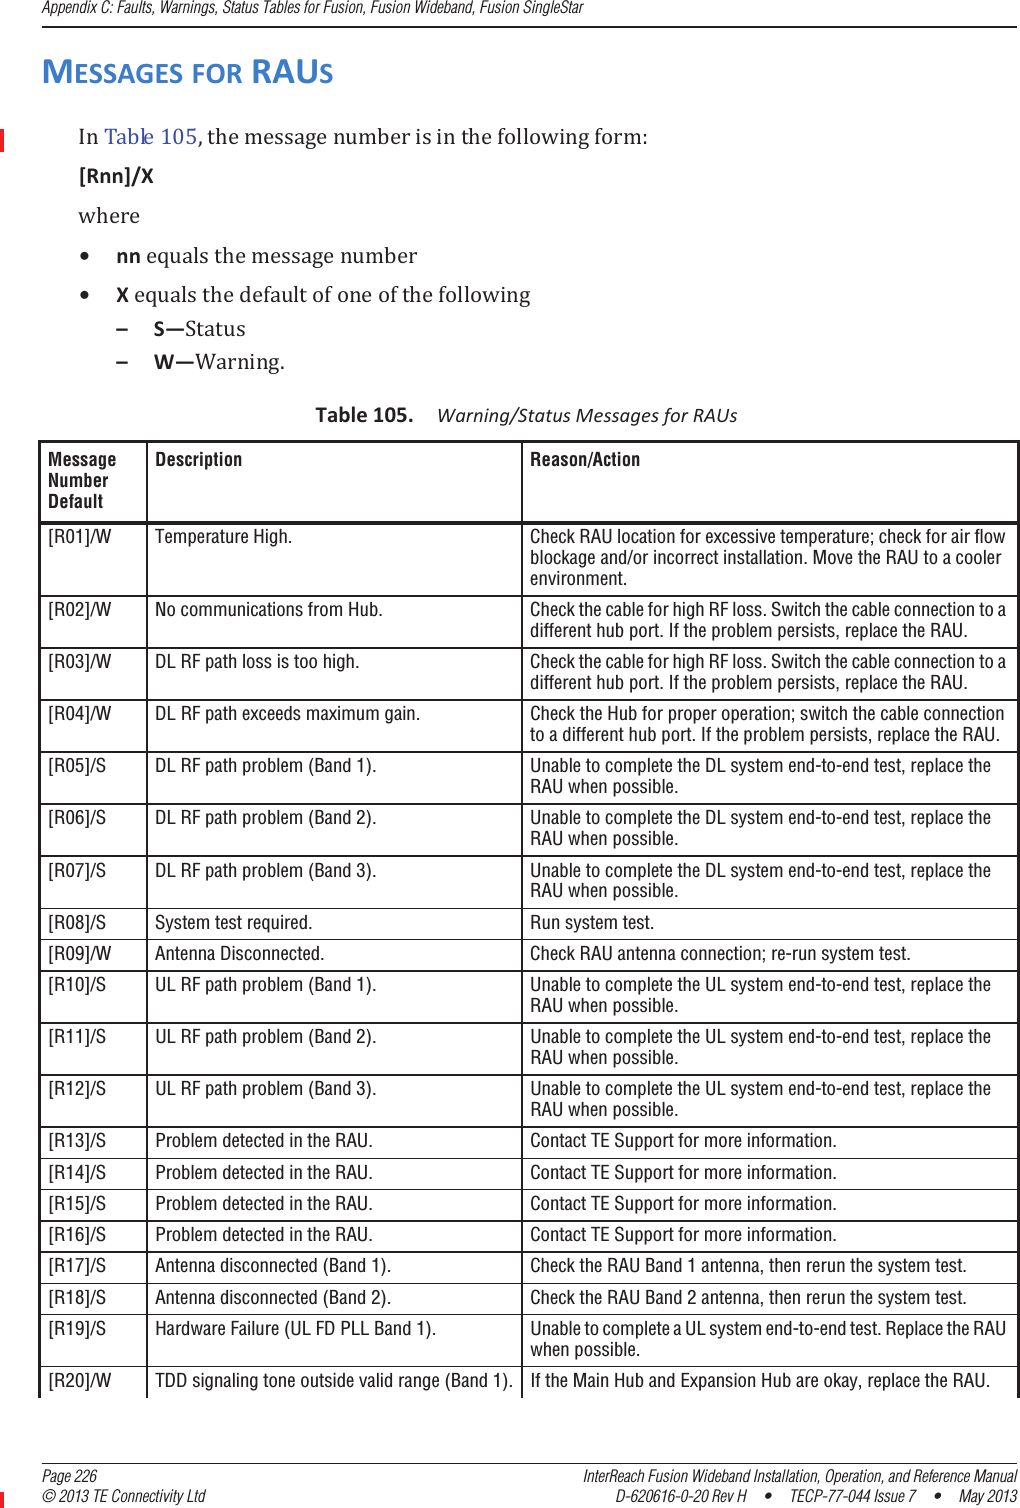 Appendix C: Faults, Warnings, Status Tables for Fusion, Fusion Wideband, Fusion SingleStar  Page 226 InterReach Fusion Wideband Installation, Operation, and Reference Manual© 2013 TE Connectivity Ltd D-620616-0-20 Rev H  •  TECP-77-044 Issue 7  •  May 2013MESSAGESFORRAUSͳͲͷǡǣ[Rnn]/X• nn• X– S—– W—ǤTable105.Warning/StatusMessagesforRAUsMessage NumberDefaultDescription Reason/Action[R01]/W Temperature High. Check RAU location for excessive temperature; check for air flow blockage and/or incorrect installation. Move the RAU to a cooler environment.[R02]/W No communications from Hub. Check the cable for high RF loss. Switch the cable connection to a different hub port. If the problem persists, replace the RAU.[R03]/W DL RF path loss is too high. Check the cable for high RF loss. Switch the cable connection to a different hub port. If the problem persists, replace the RAU.[R04]/W DL RF path exceeds maximum gain. Check the Hub for proper operation; switch the cable connection to a different hub port. If the problem persists, replace the RAU.[R05]/S DL RF path problem (Band 1). Unable to complete the DL system end-to-end test, replace the RAU when possible.[R06]/S DL RF path problem (Band 2). Unable to complete the DL system end-to-end test, replace the RAU when possible.[R07]/S DL RF path problem (Band 3). Unable to complete the DL system end-to-end test, replace the RAU when possible.[R08]/S System test required. Run system test.[R09]/W Antenna Disconnected. Check RAU antenna connection; re-run system test.[R10]/S UL RF path problem (Band 1). Unable to complete the UL system end-to-end test, replace the RAU when possible.[R11]/S UL RF path problem (Band 2). Unable to complete the UL system end-to-end test, replace the RAU when possible.[R12]/S UL RF path problem (Band 3). Unable to complete the UL system end-to-end test, replace the RAU when possible.[R13]/S Problem detected in the RAU. Contact TE Support for more information.[R14]/S Problem detected in the RAU. Contact TE Support for more information.[R15]/S Problem detected in the RAU. Contact TE Support for more information.[R16]/S Problem detected in the RAU. Contact TE Support for more information.[R17]/S Antenna disconnected (Band 1). Check the RAU Band 1 antenna, then rerun the system test.[R18]/S Antenna disconnected (Band 2). Check the RAU Band 2 antenna, then rerun the system test.[R19]/S Hardware Failure (UL FD PLL Band 1). Unable to complete a UL system end-to-end test. Replace the RAU when possible.[R20]/W TDD signaling tone outside valid range (Band 1). If the Main Hub and Expansion Hub are okay, replace the RAU.